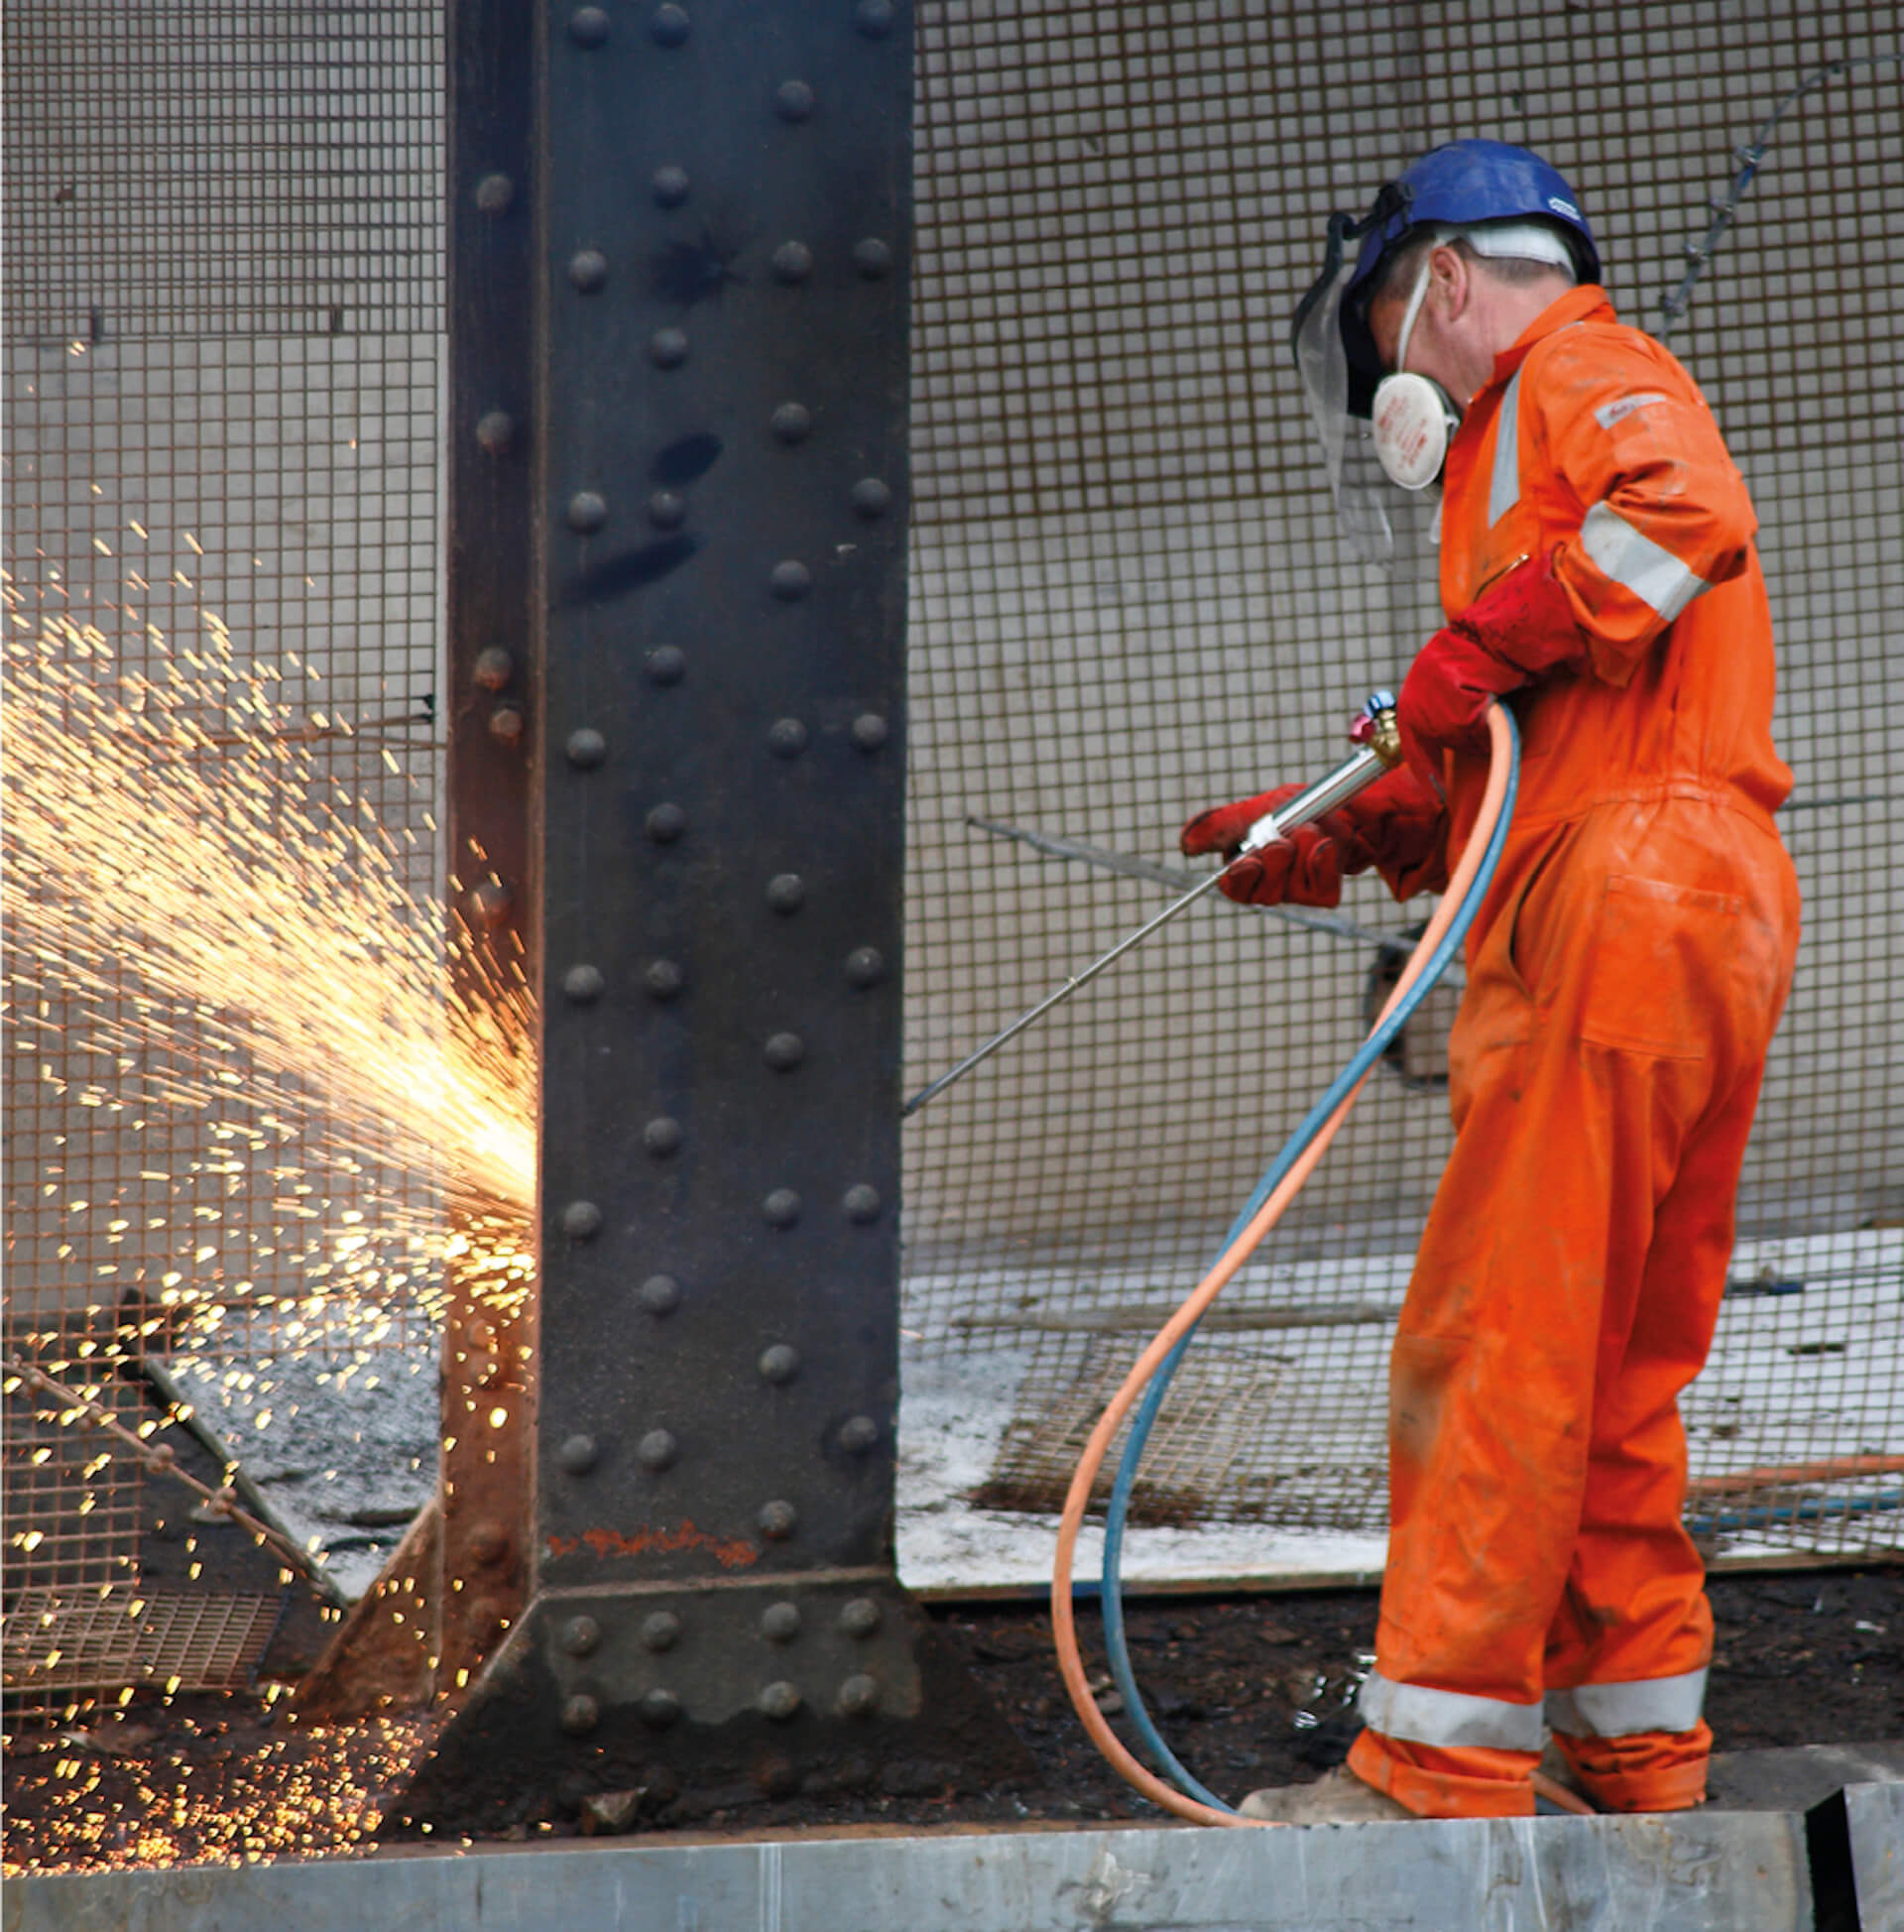 worker is carrying out hot cutting works to a steel Girder. Worker is wearing high visibility protective wear